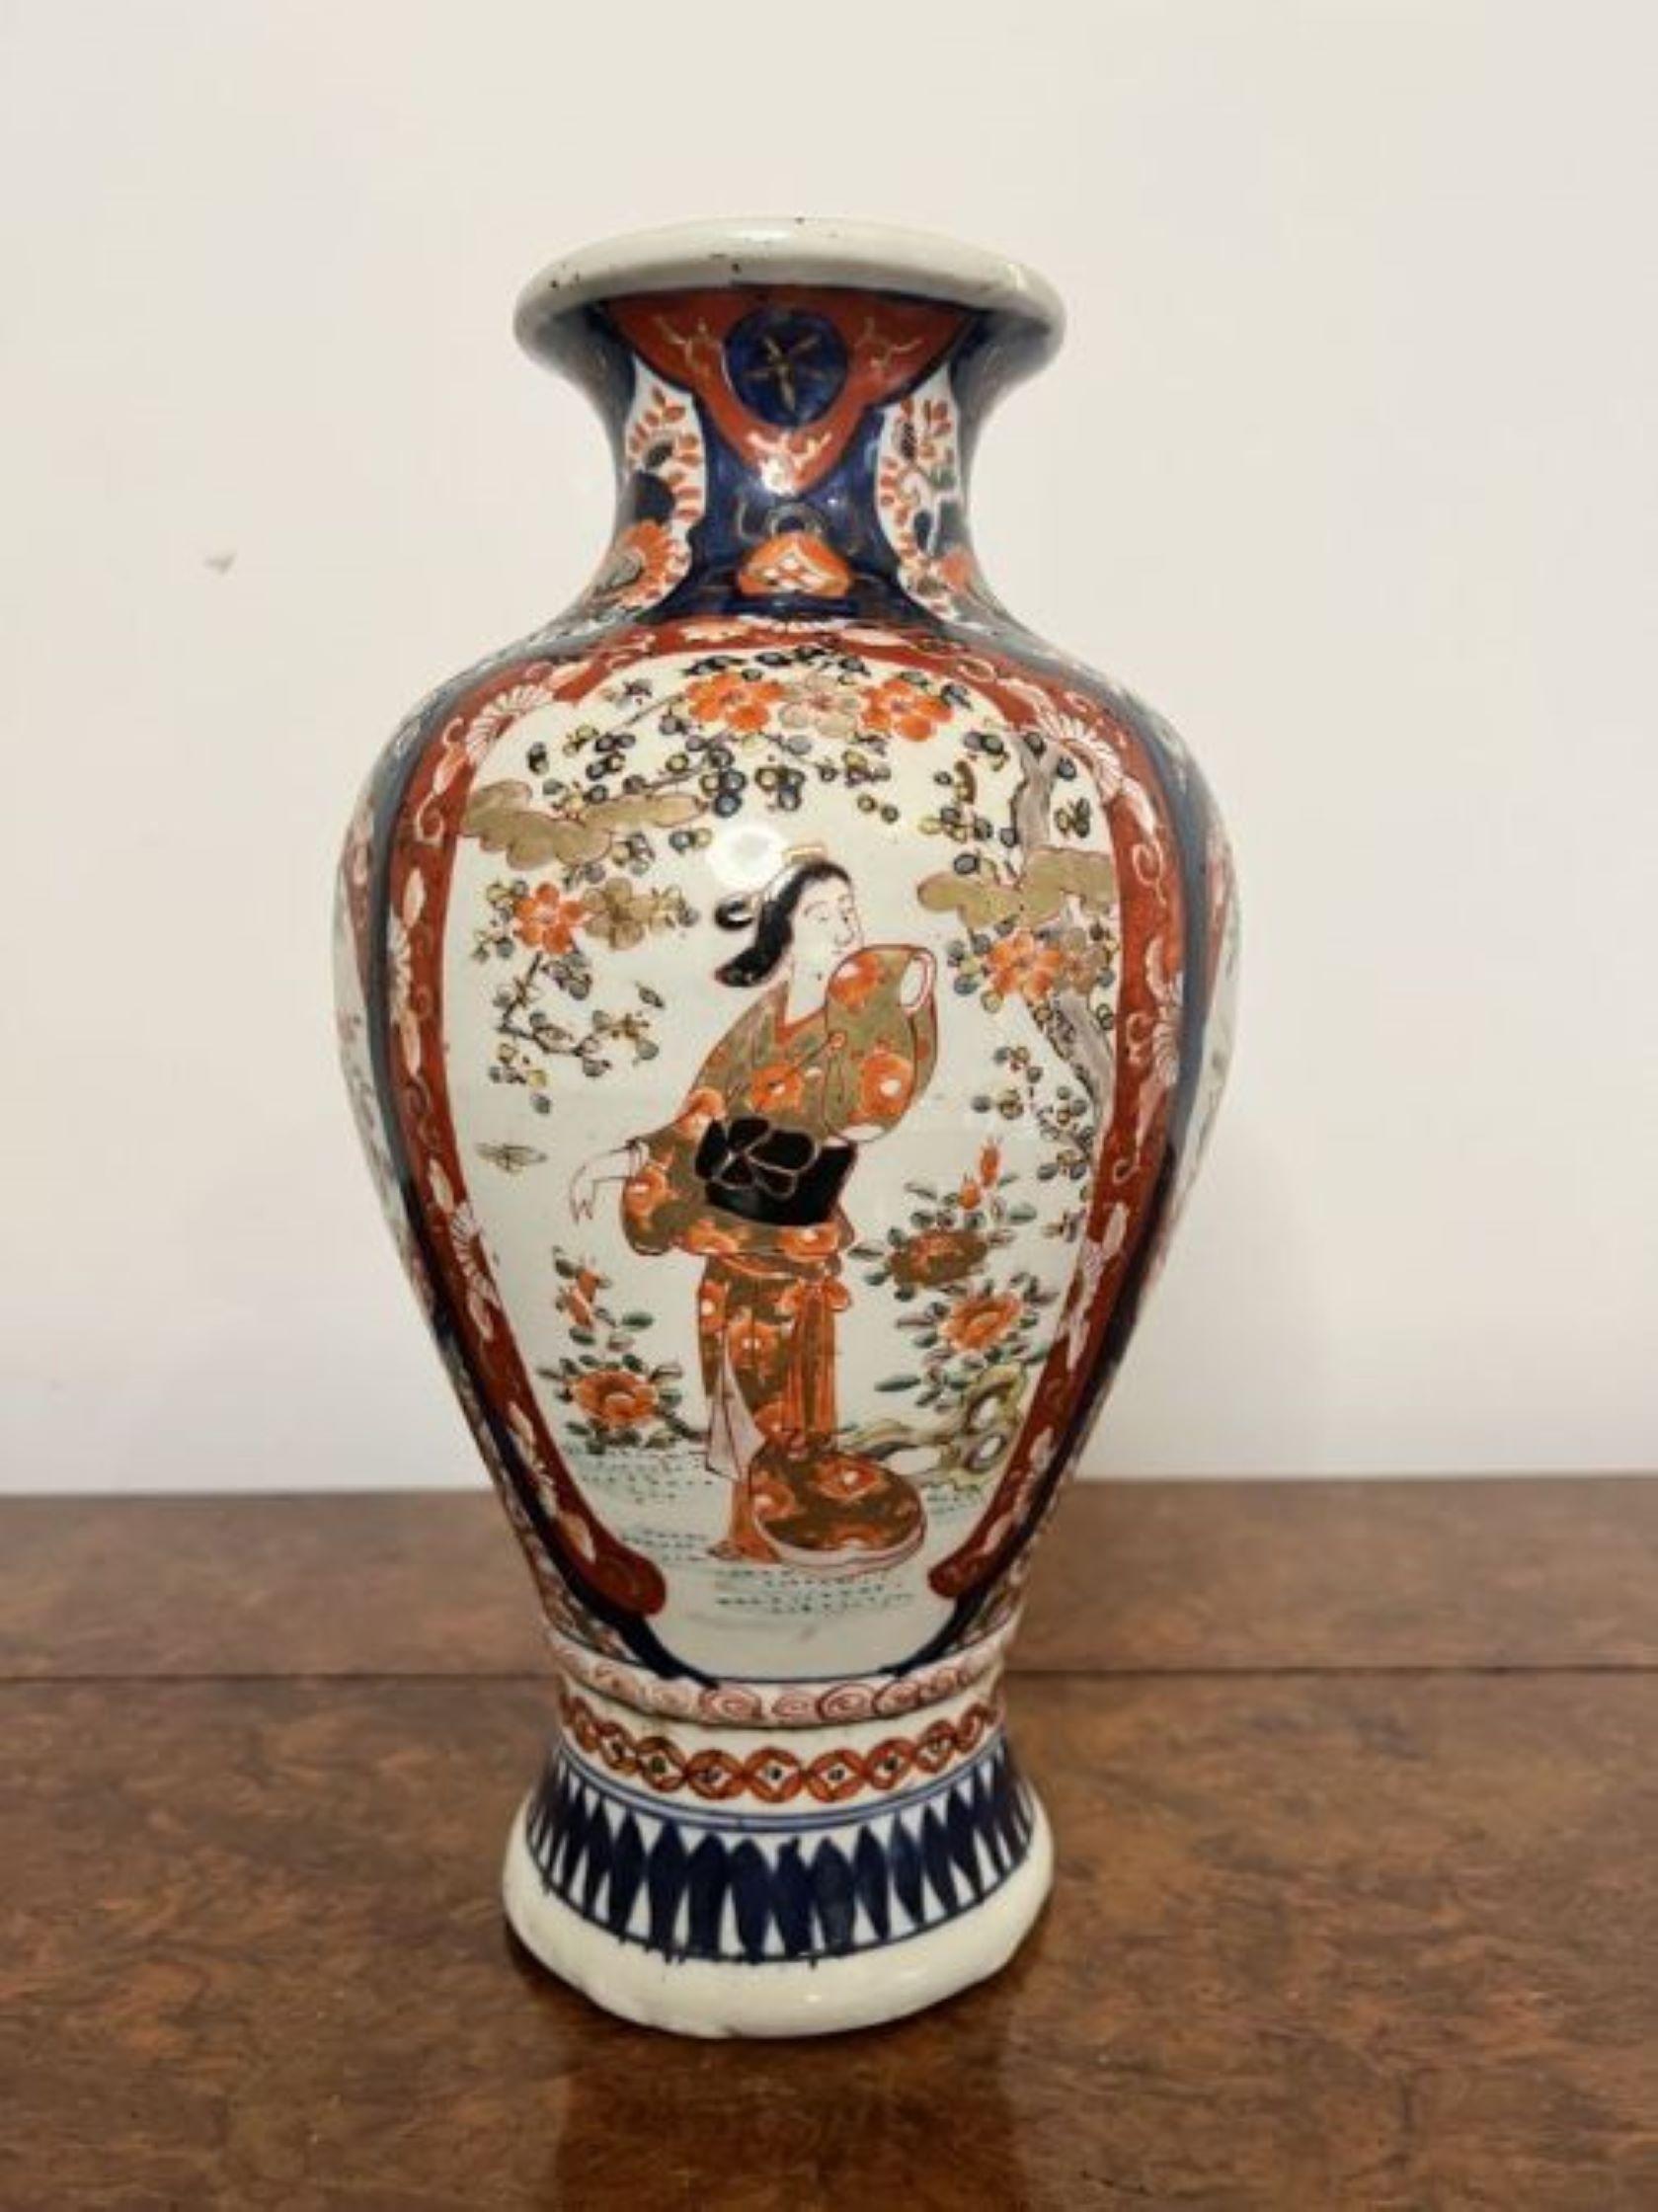 Fantastic quality antique Japanese Imari shaped vase having a quality antique Japanese Imari vase, with a fluted shaped neck and a bulbous body decorated with traditional figures, flowers, trees and patterns in wonderful red, blue, white, green and